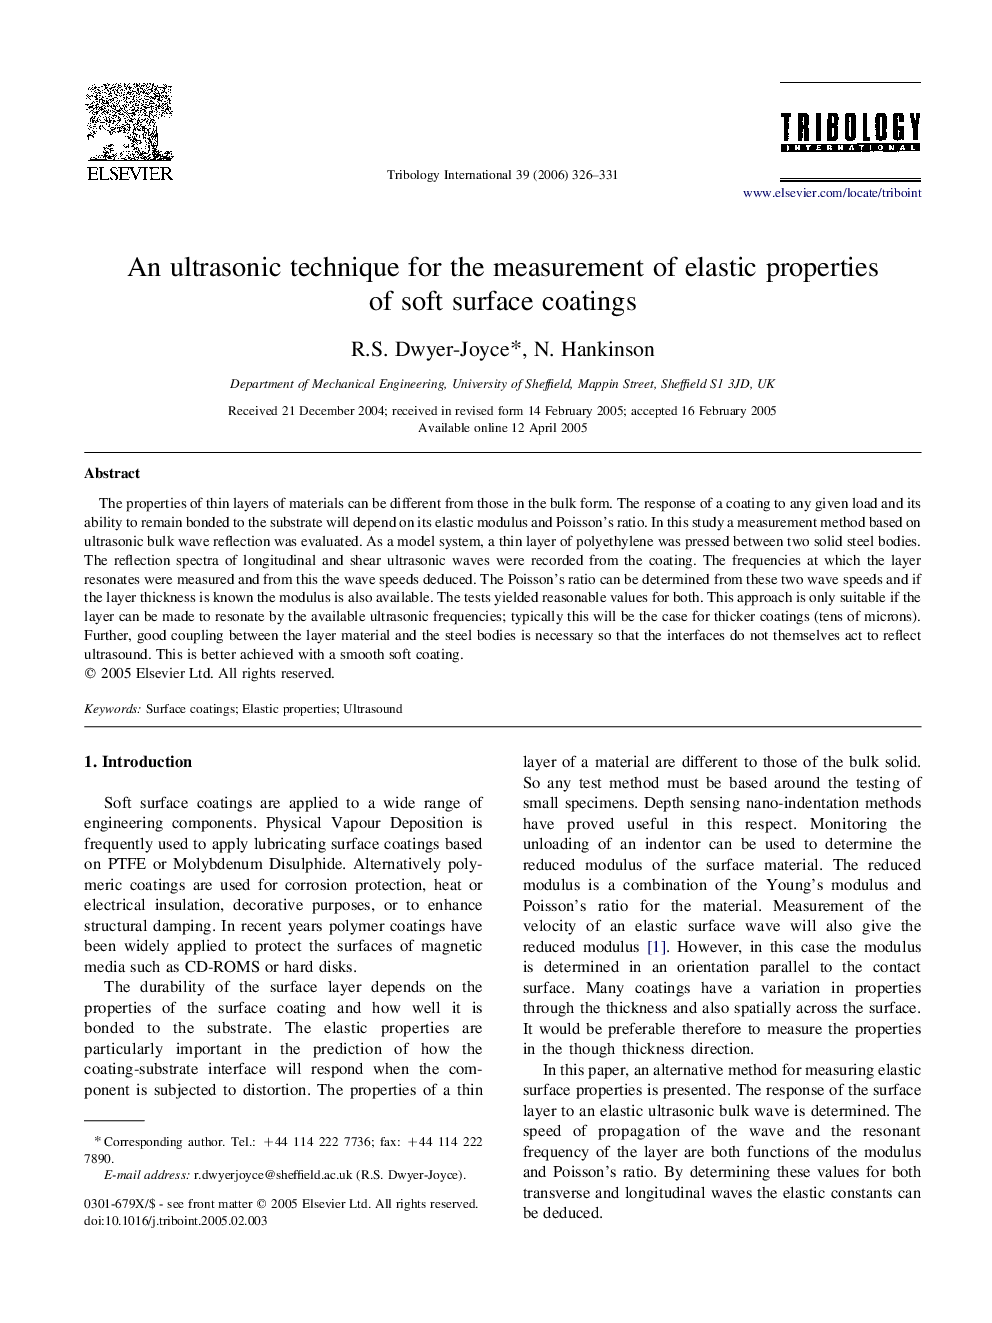 An ultrasonic technique for the measurement of elastic properties of soft surface coatings